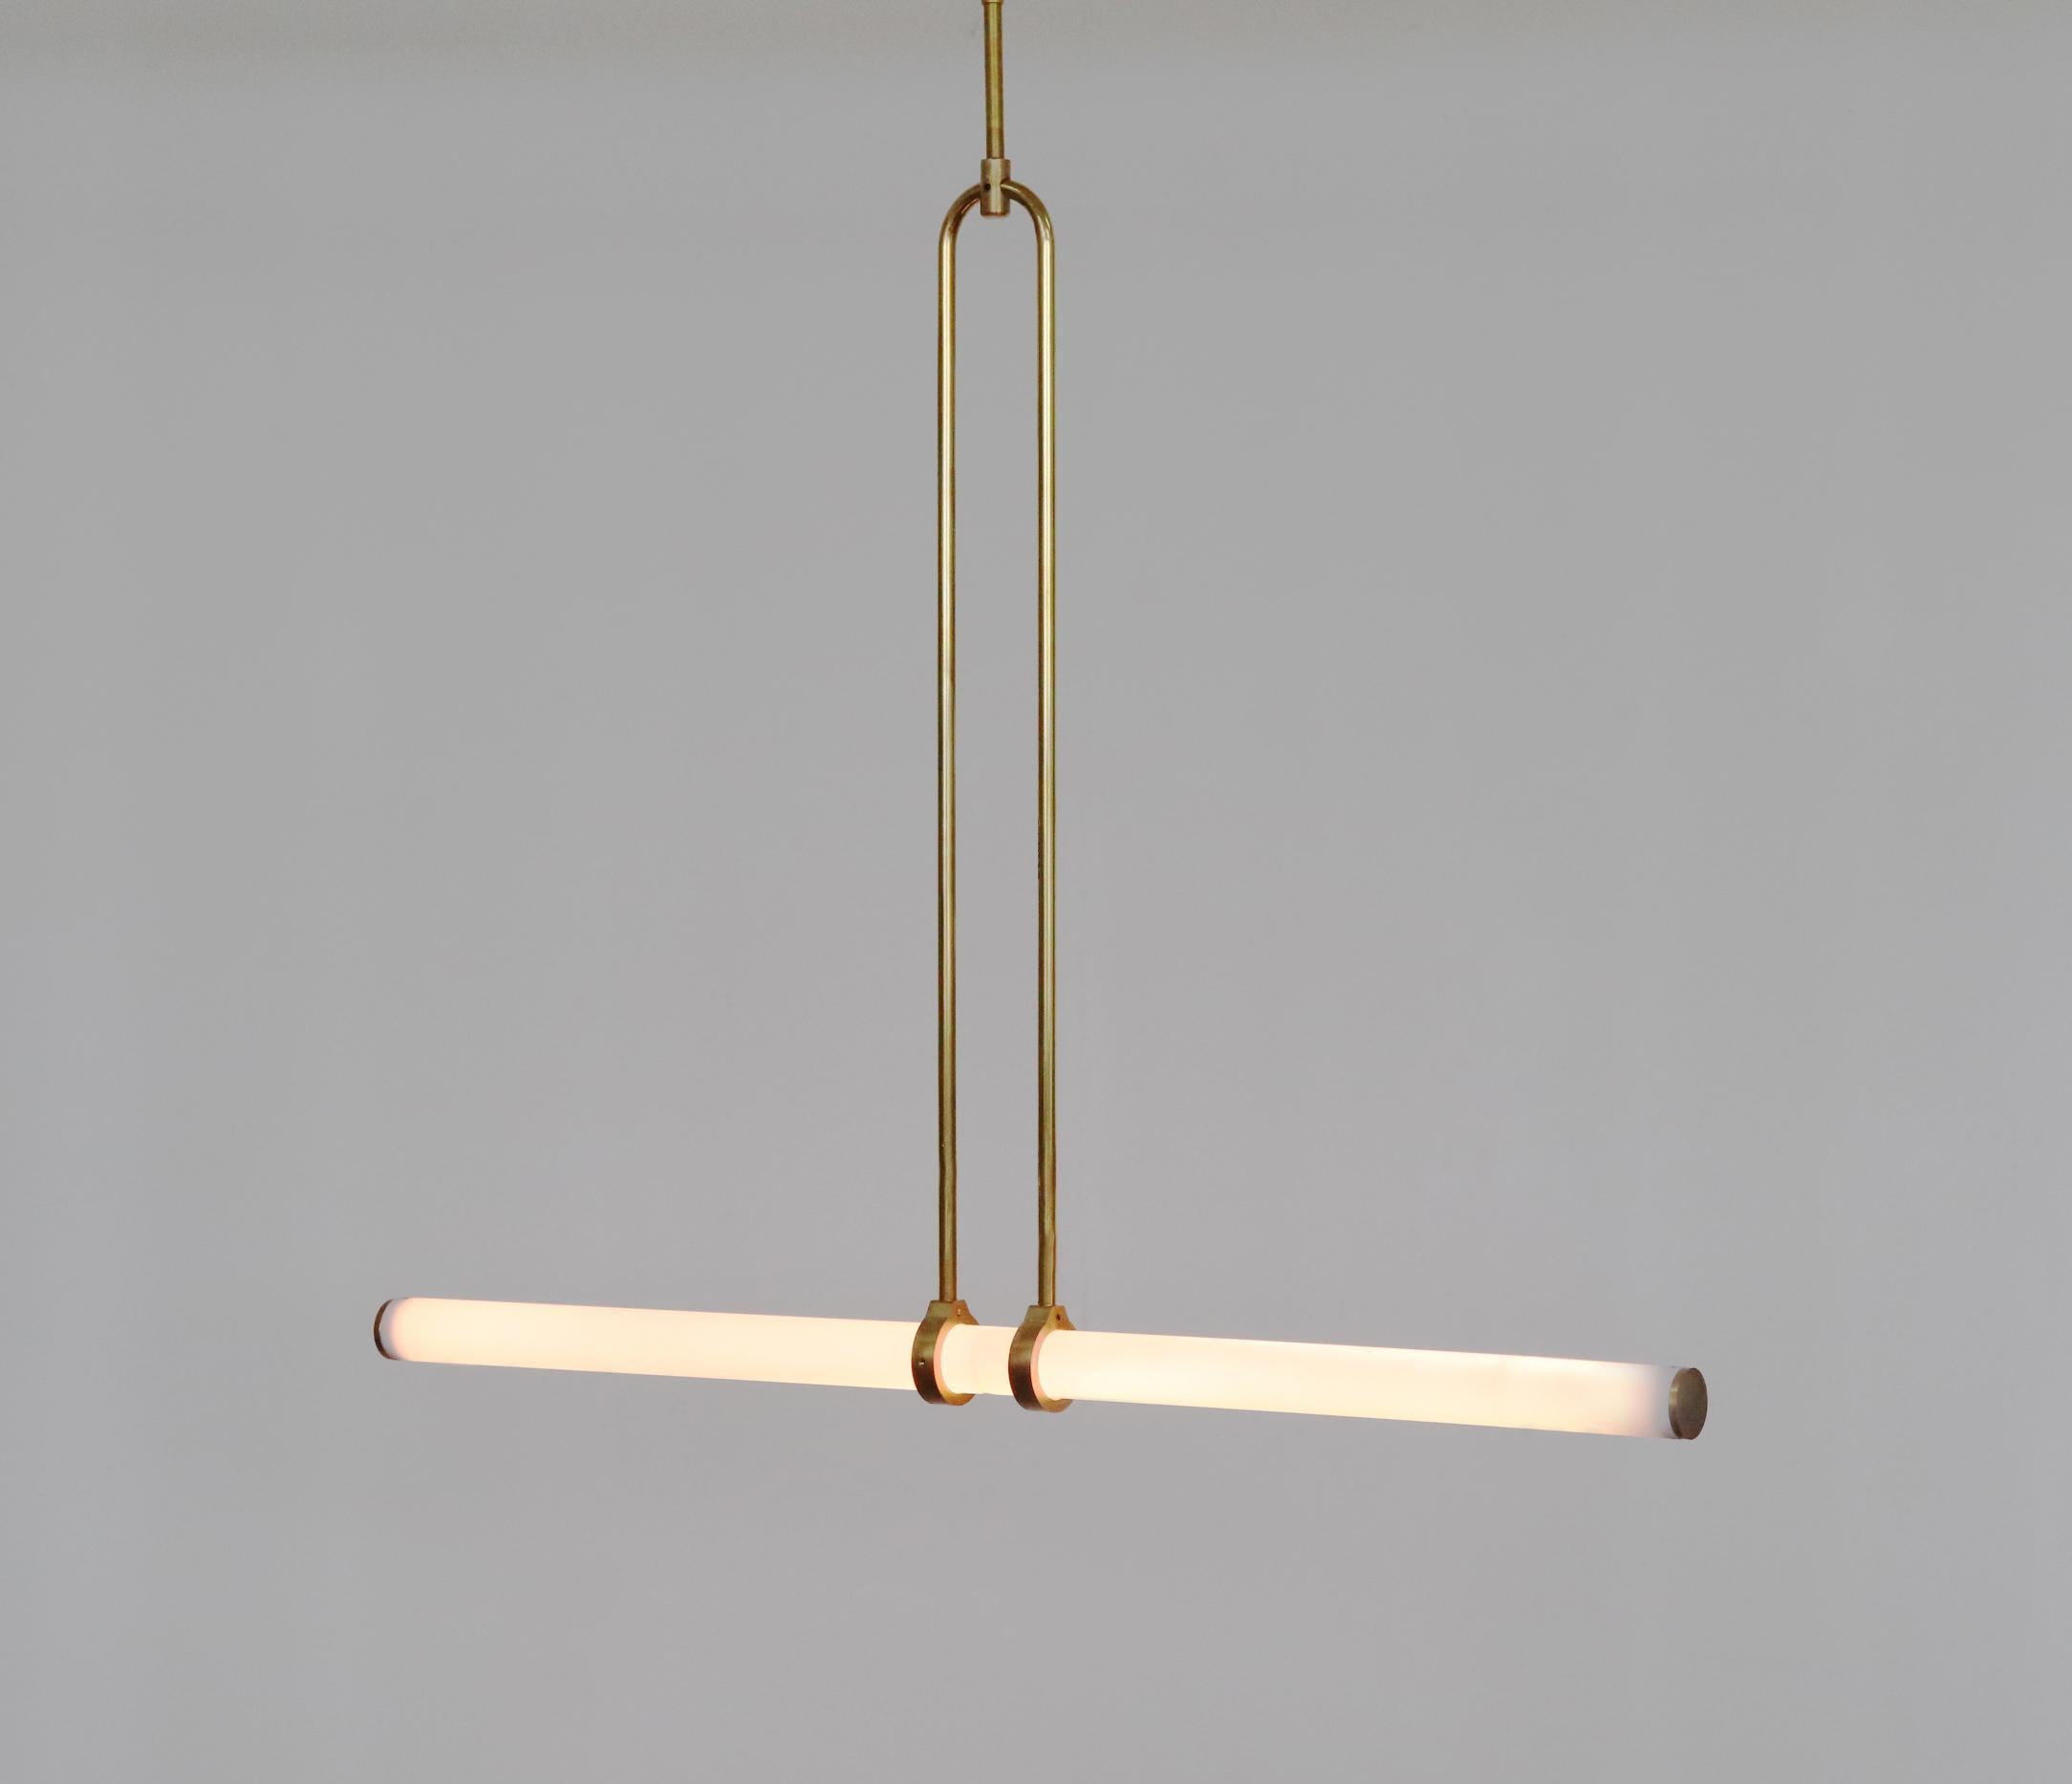 Light object 018 by Naama Hofman
Dimensions: W 81 H 68-150cm (height to order)
Light tube diameter: 35 mm
Brass pipe diameter: 10 mm
Canopy diameter: 20 cm.


Material : Polished Brass pipe, Acrylic tube, LED lights
Finish: Natural